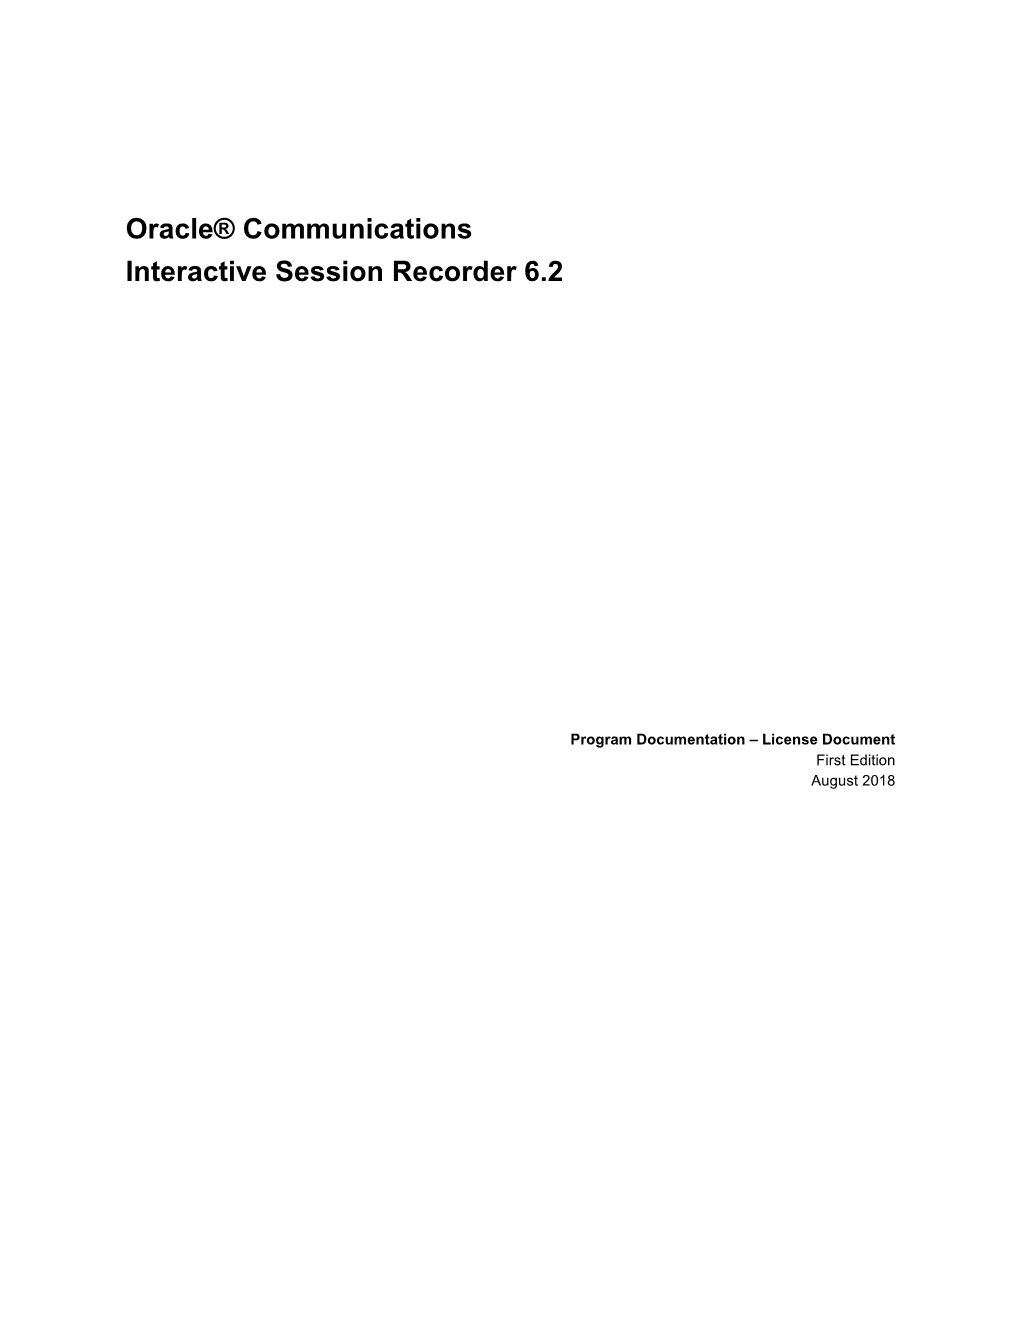 Oracle® Communications Interactive Session Recorder 6.2